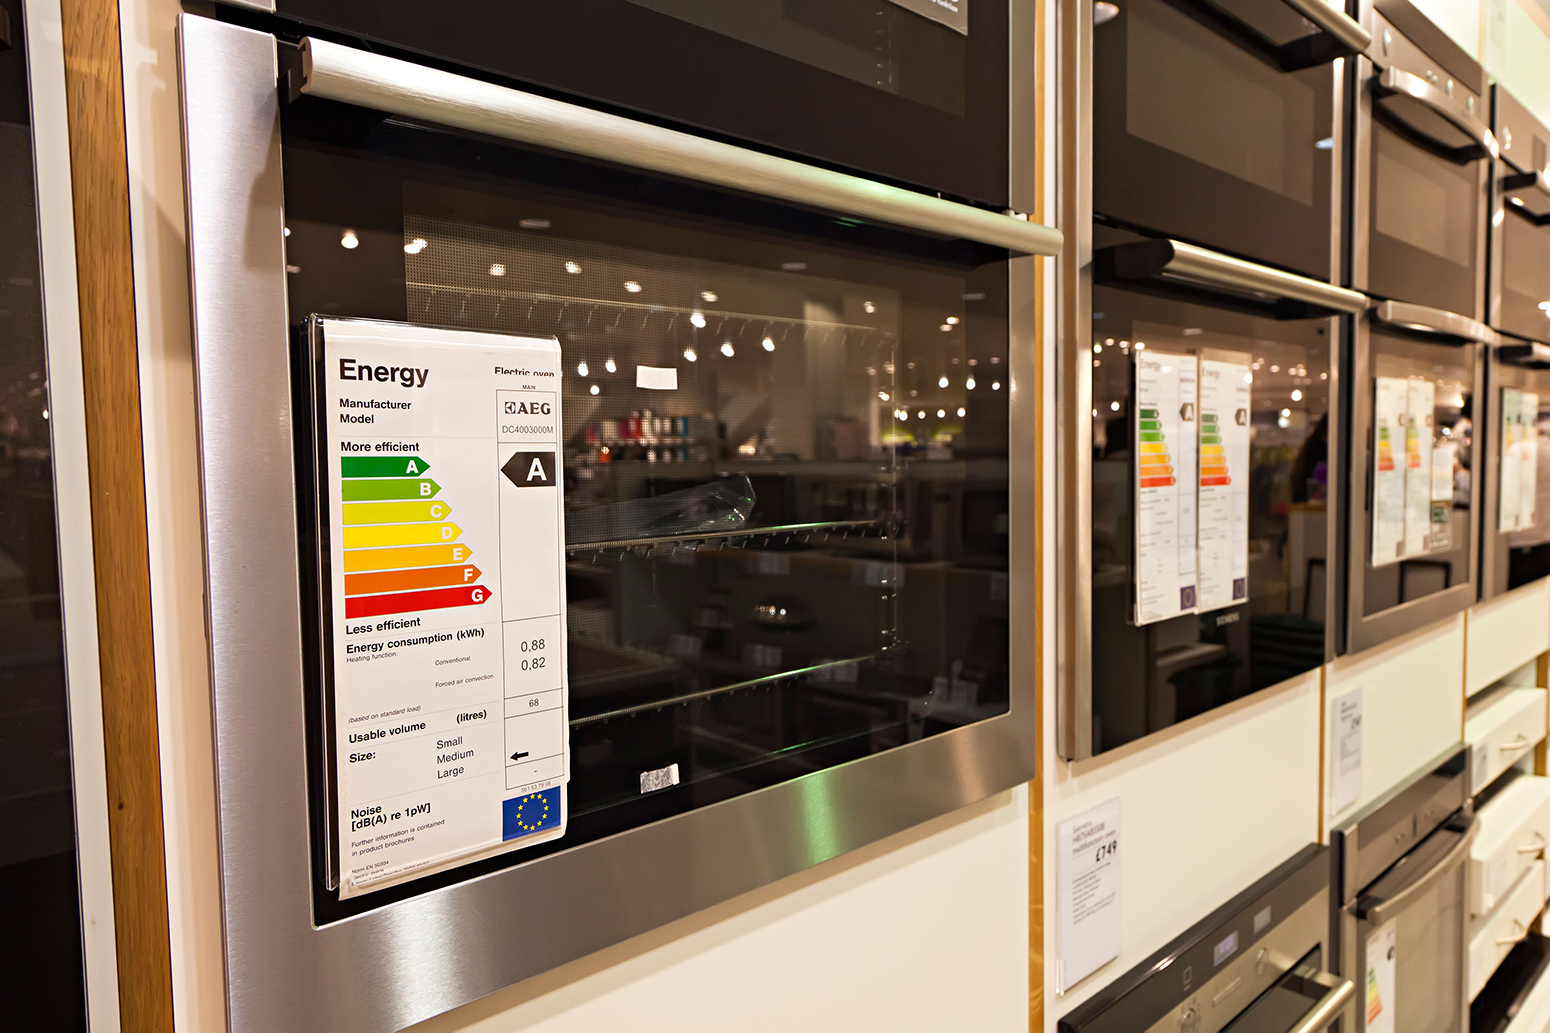 Energy efficiency rating on electric ovens in store UK.